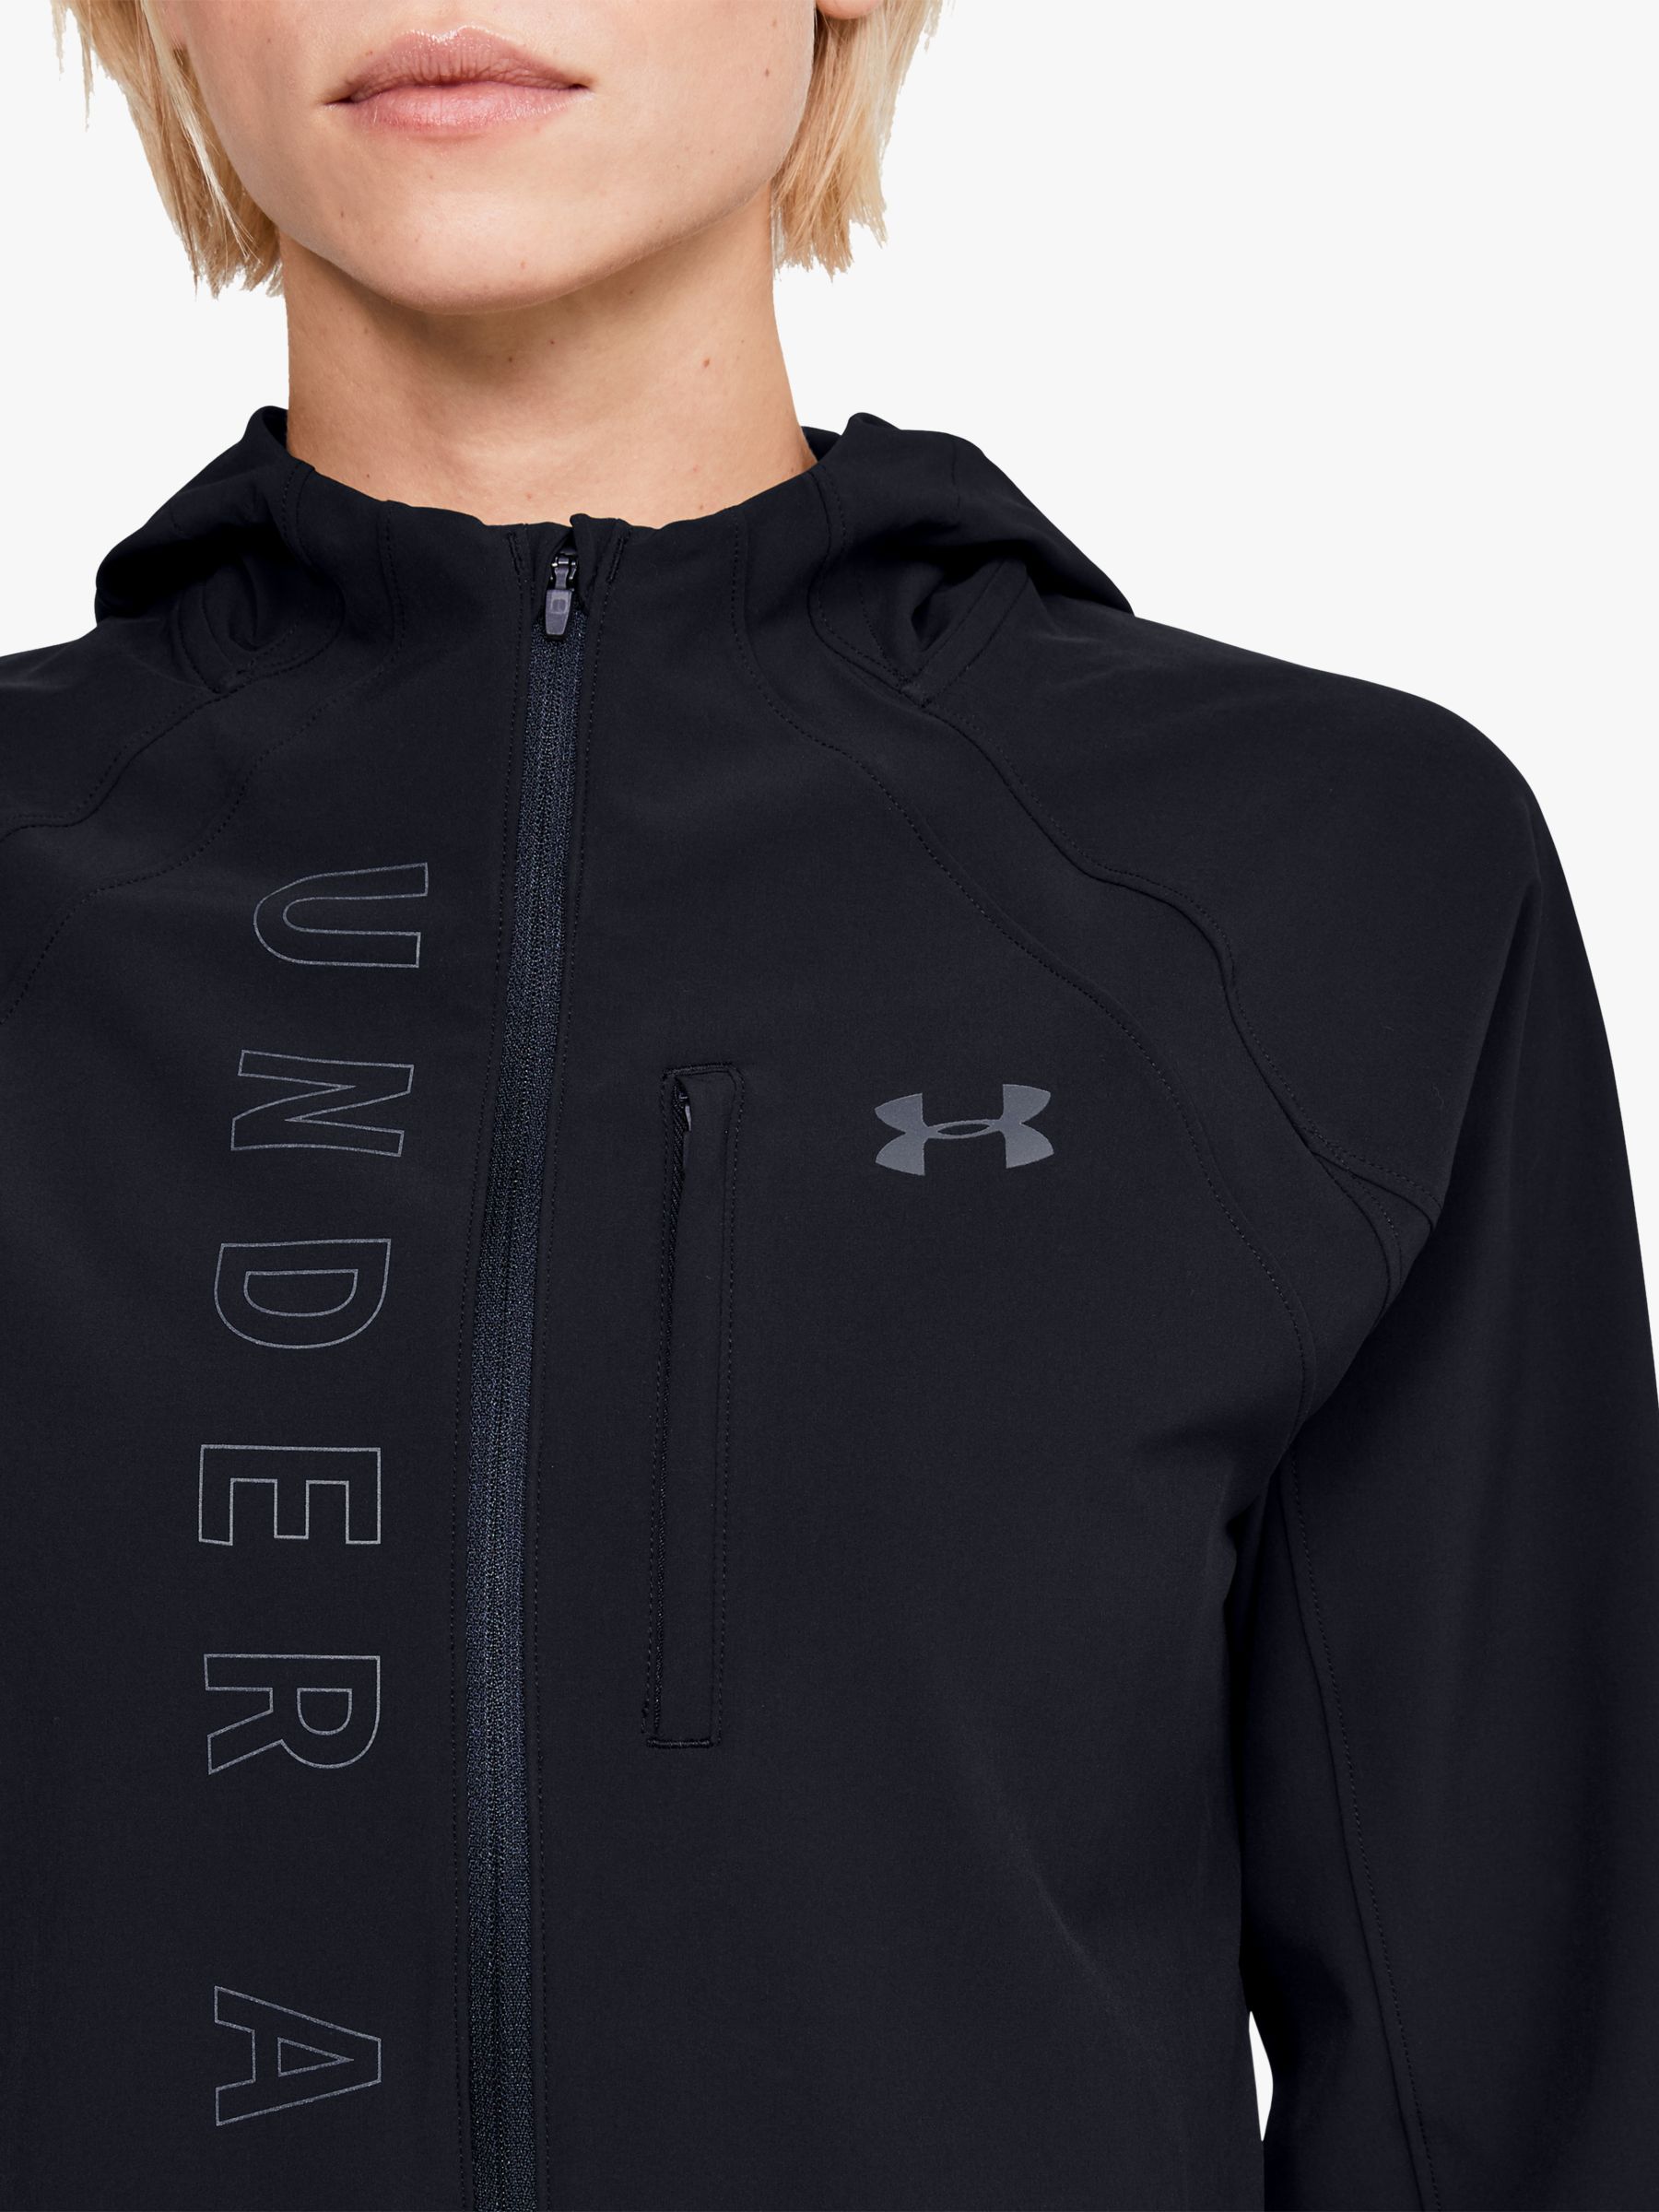 Under Armour Qualifier Outrun The Storm Women's Running Jacket, Black